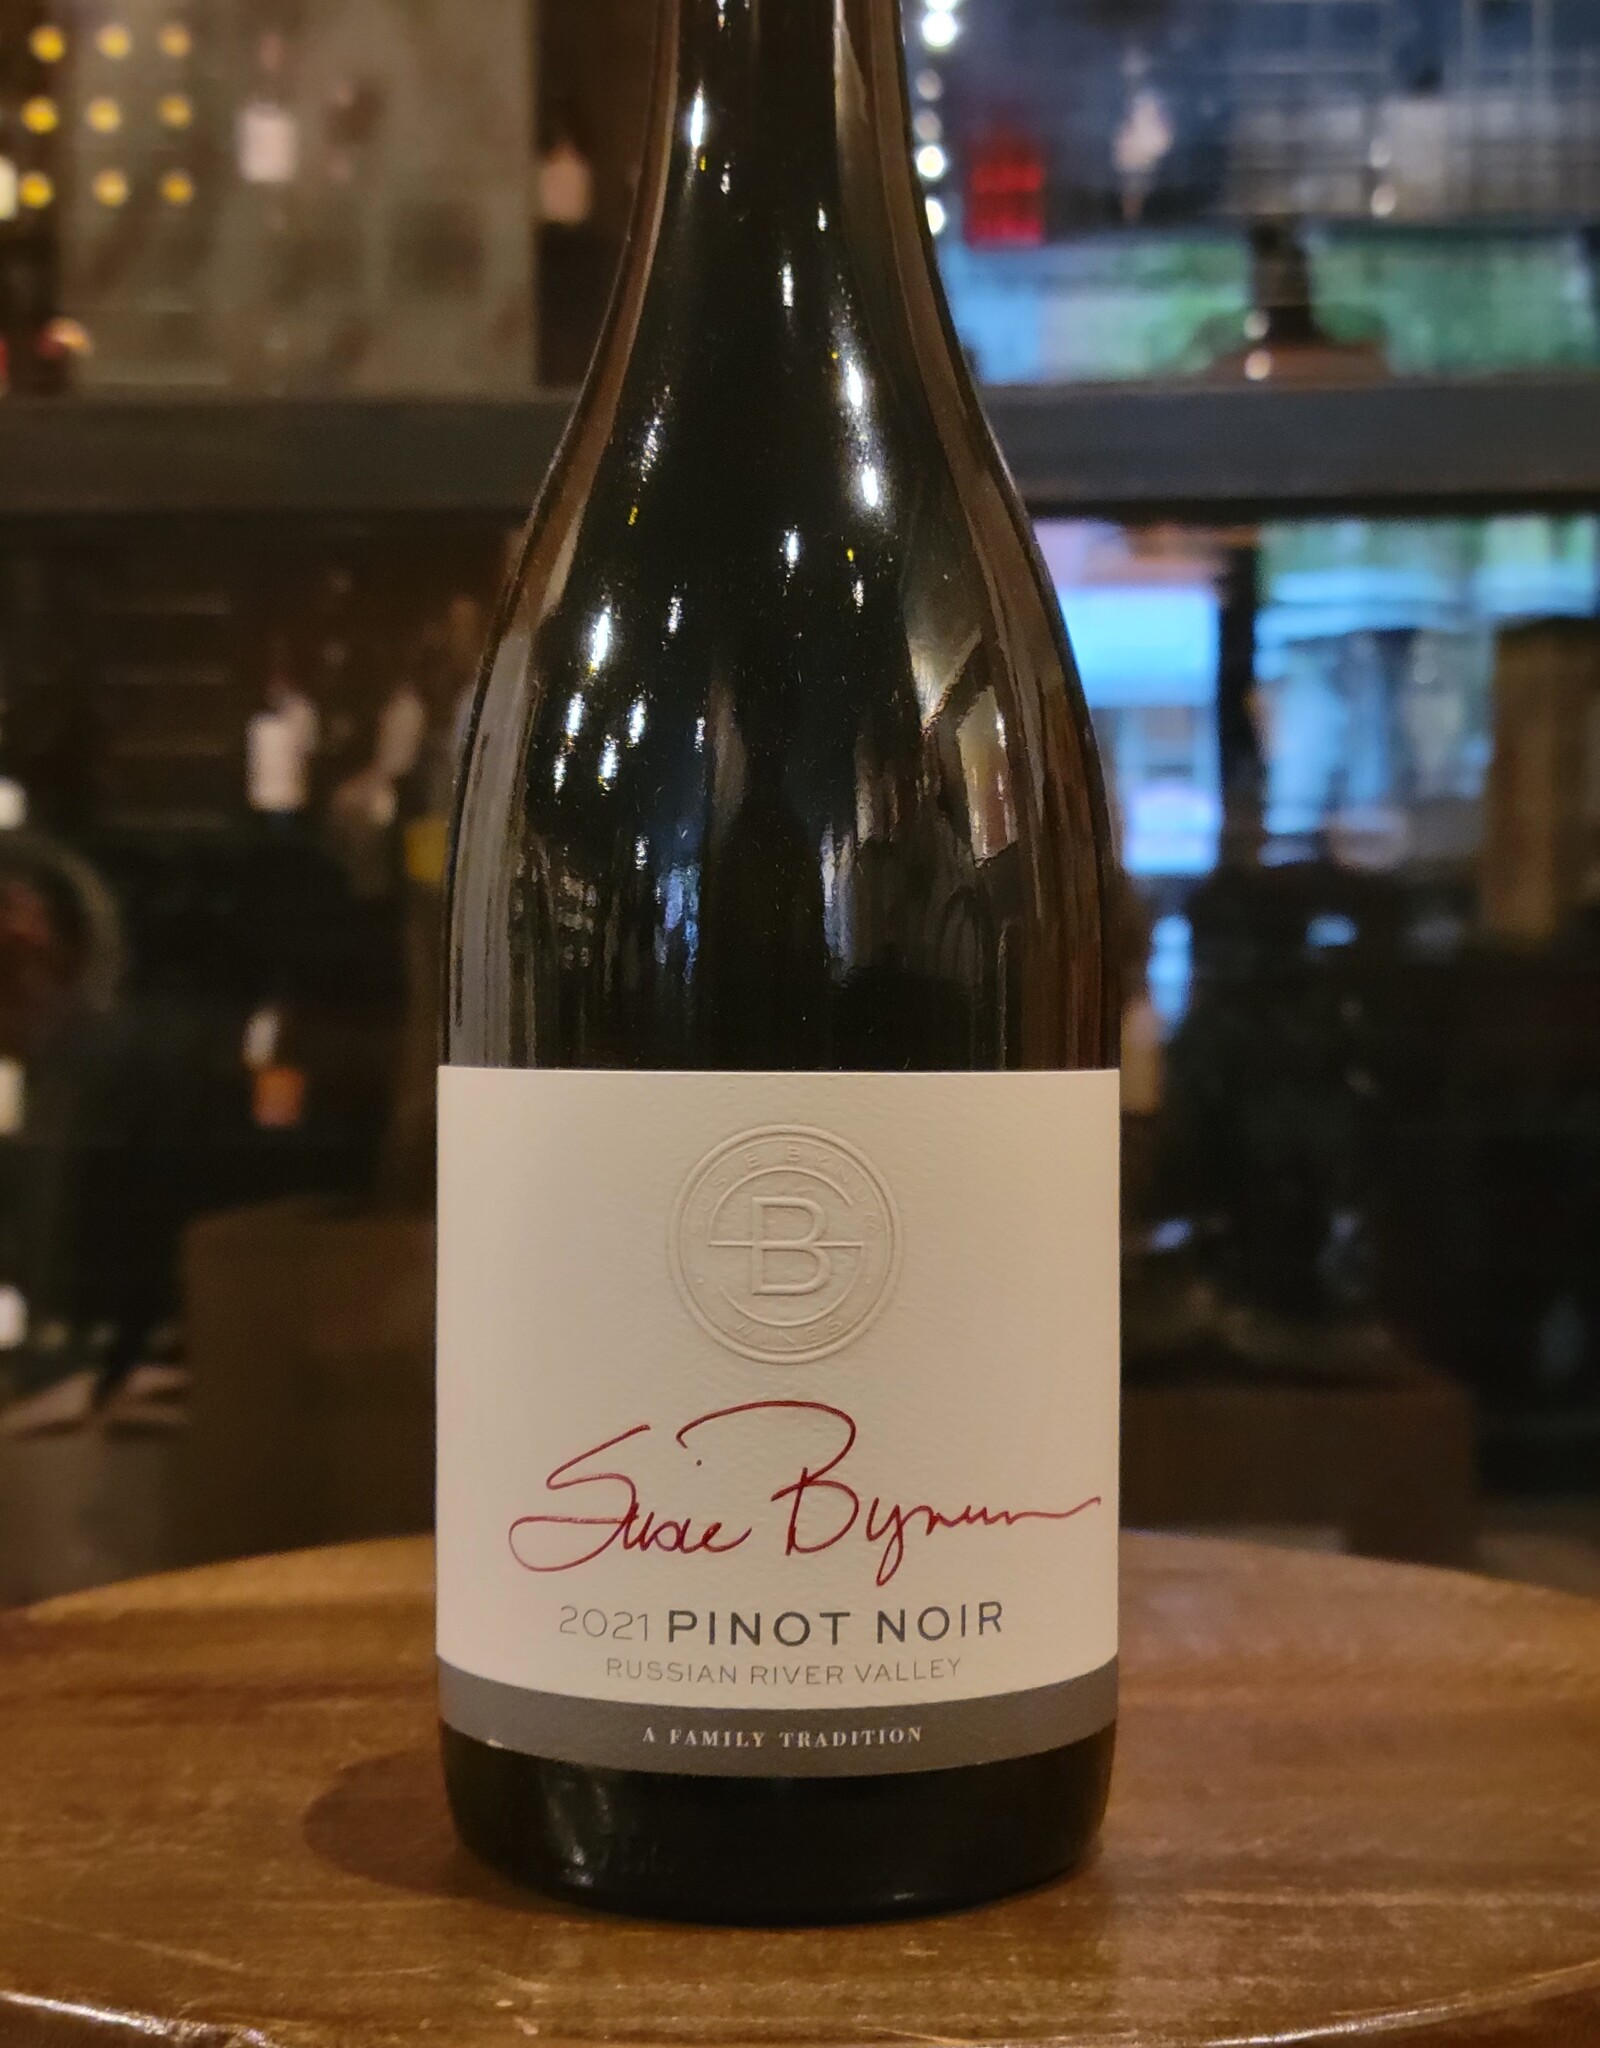 Susie Bynum Russian River Valley Pinot Noir